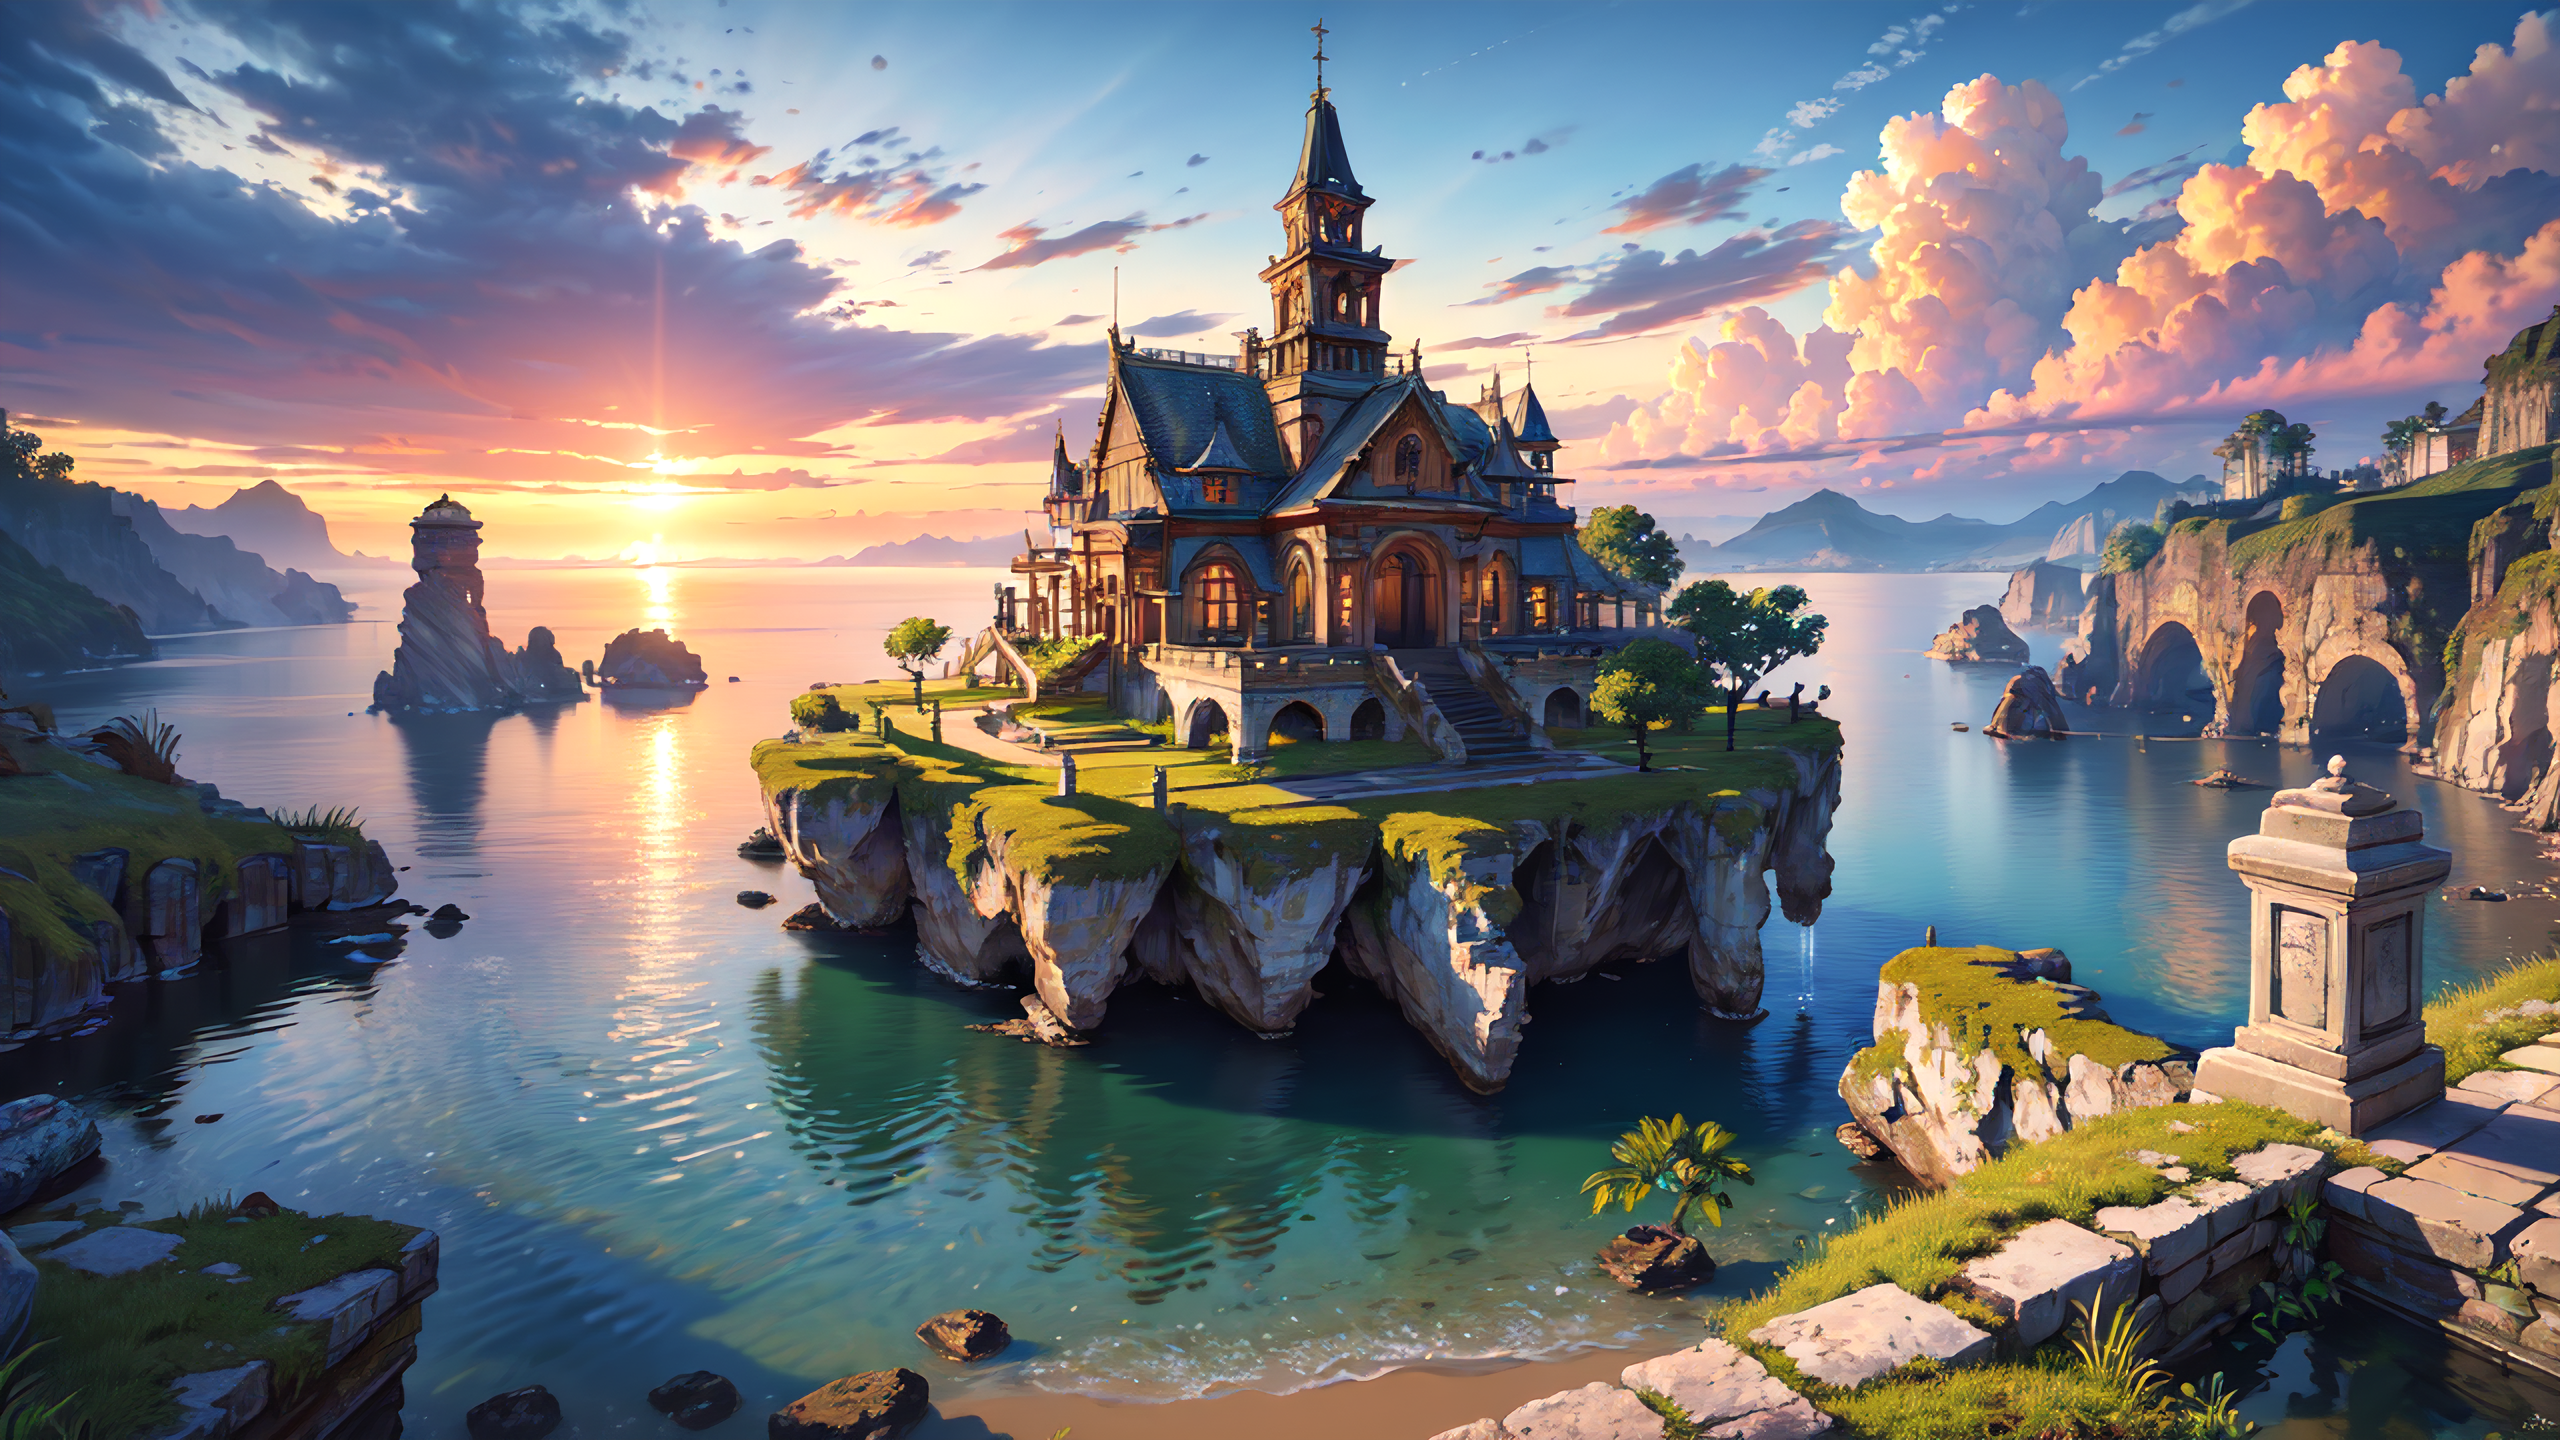 A castle-like house sits on a rock in the middle of the ocean.